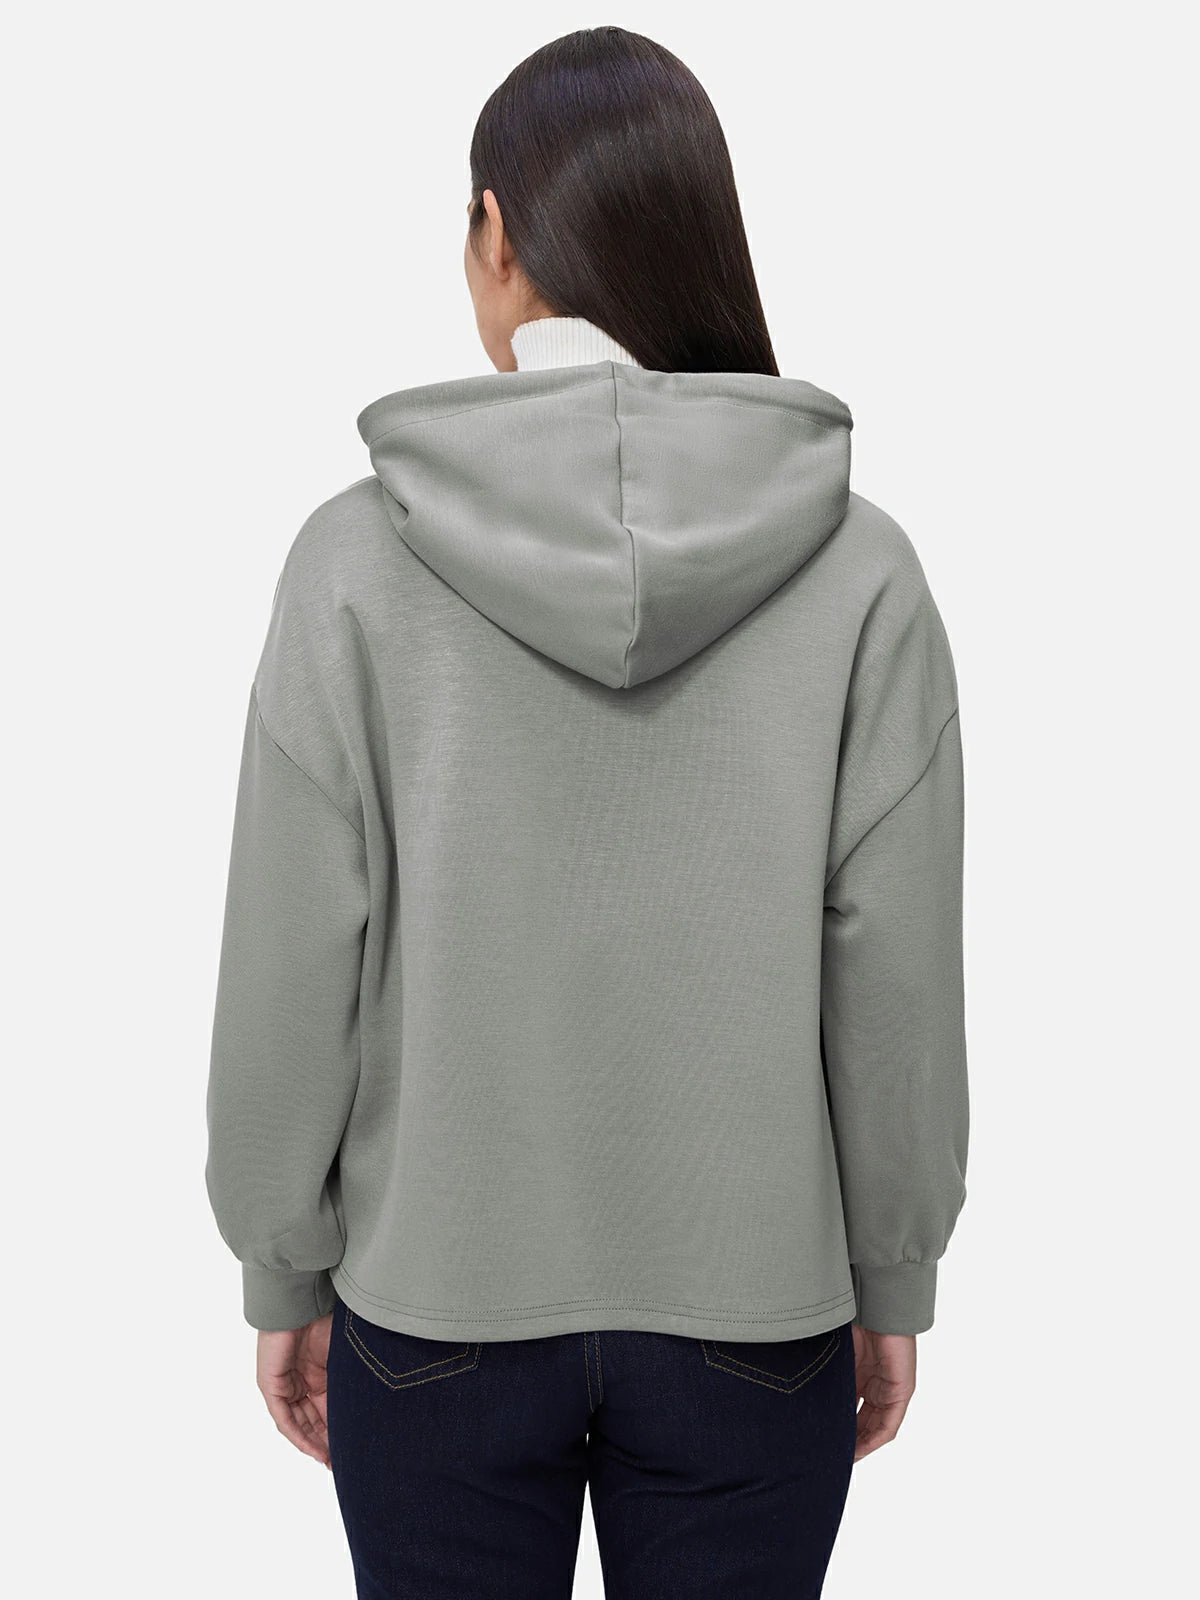 Everyday Style Companion: Grey Slouchy Hooded Sweatshirt with Contemporary Flair